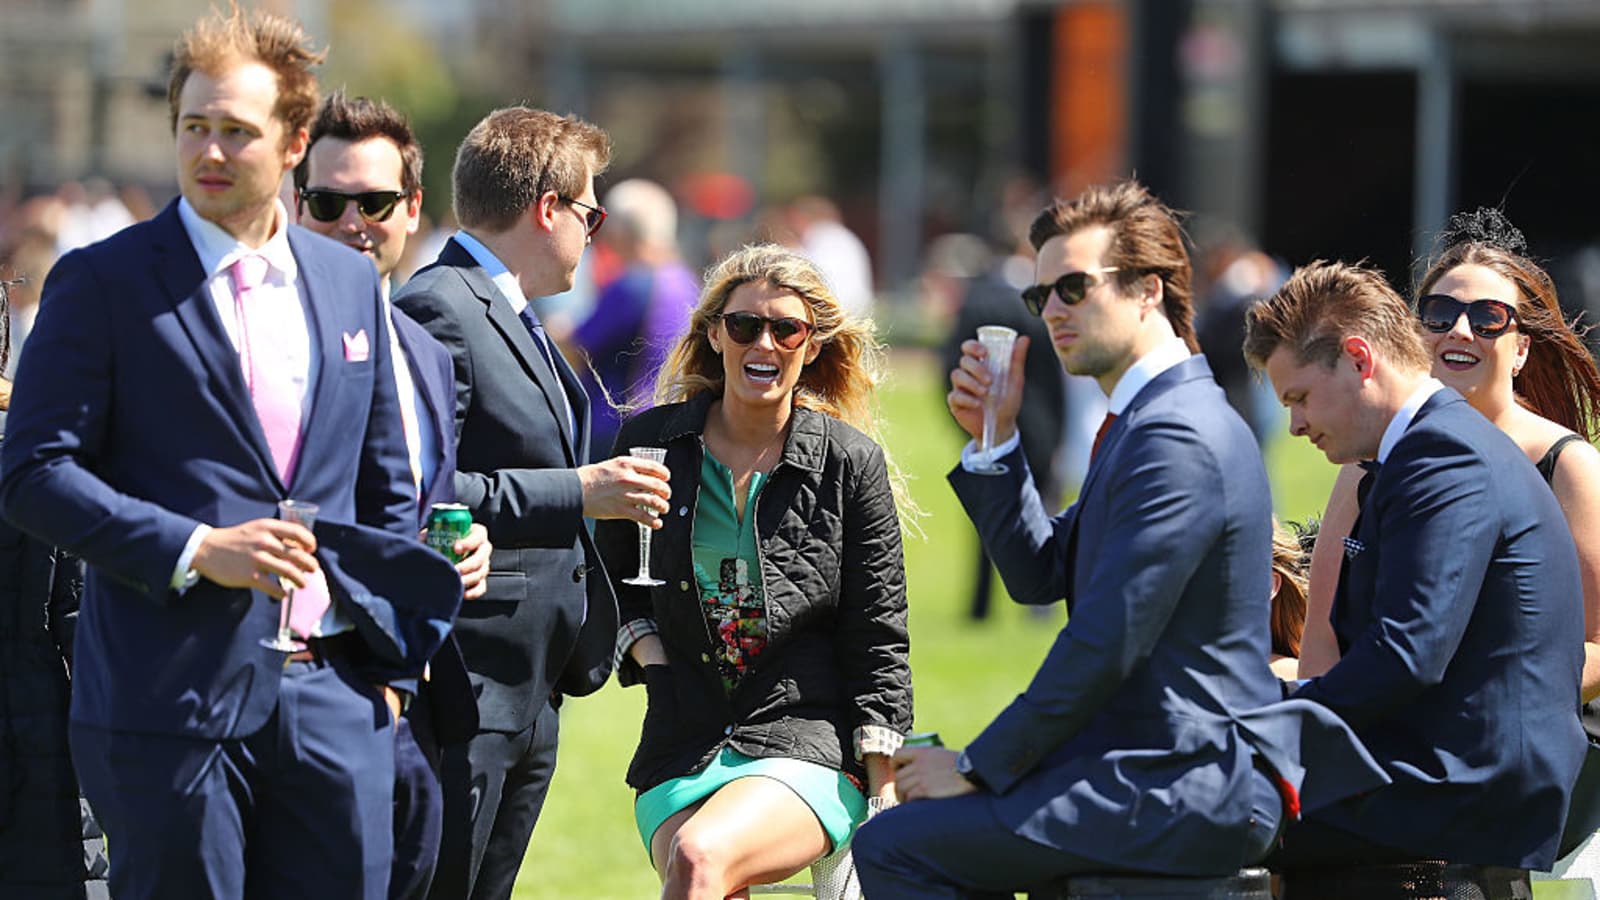 8 ways rich people view the world differently than the average person